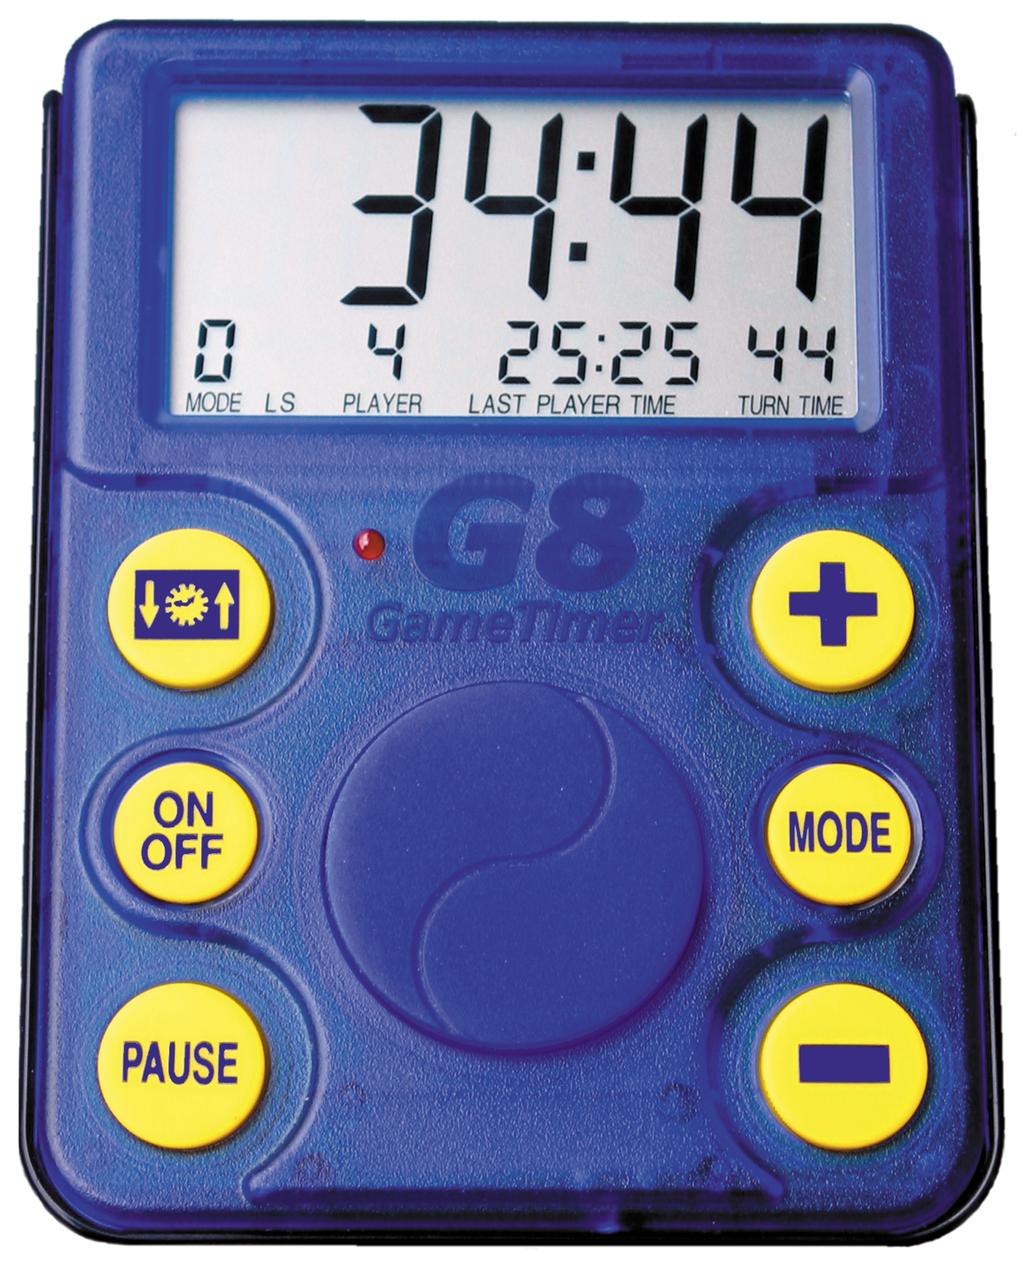 The G8 game timer G8 is trademarked and